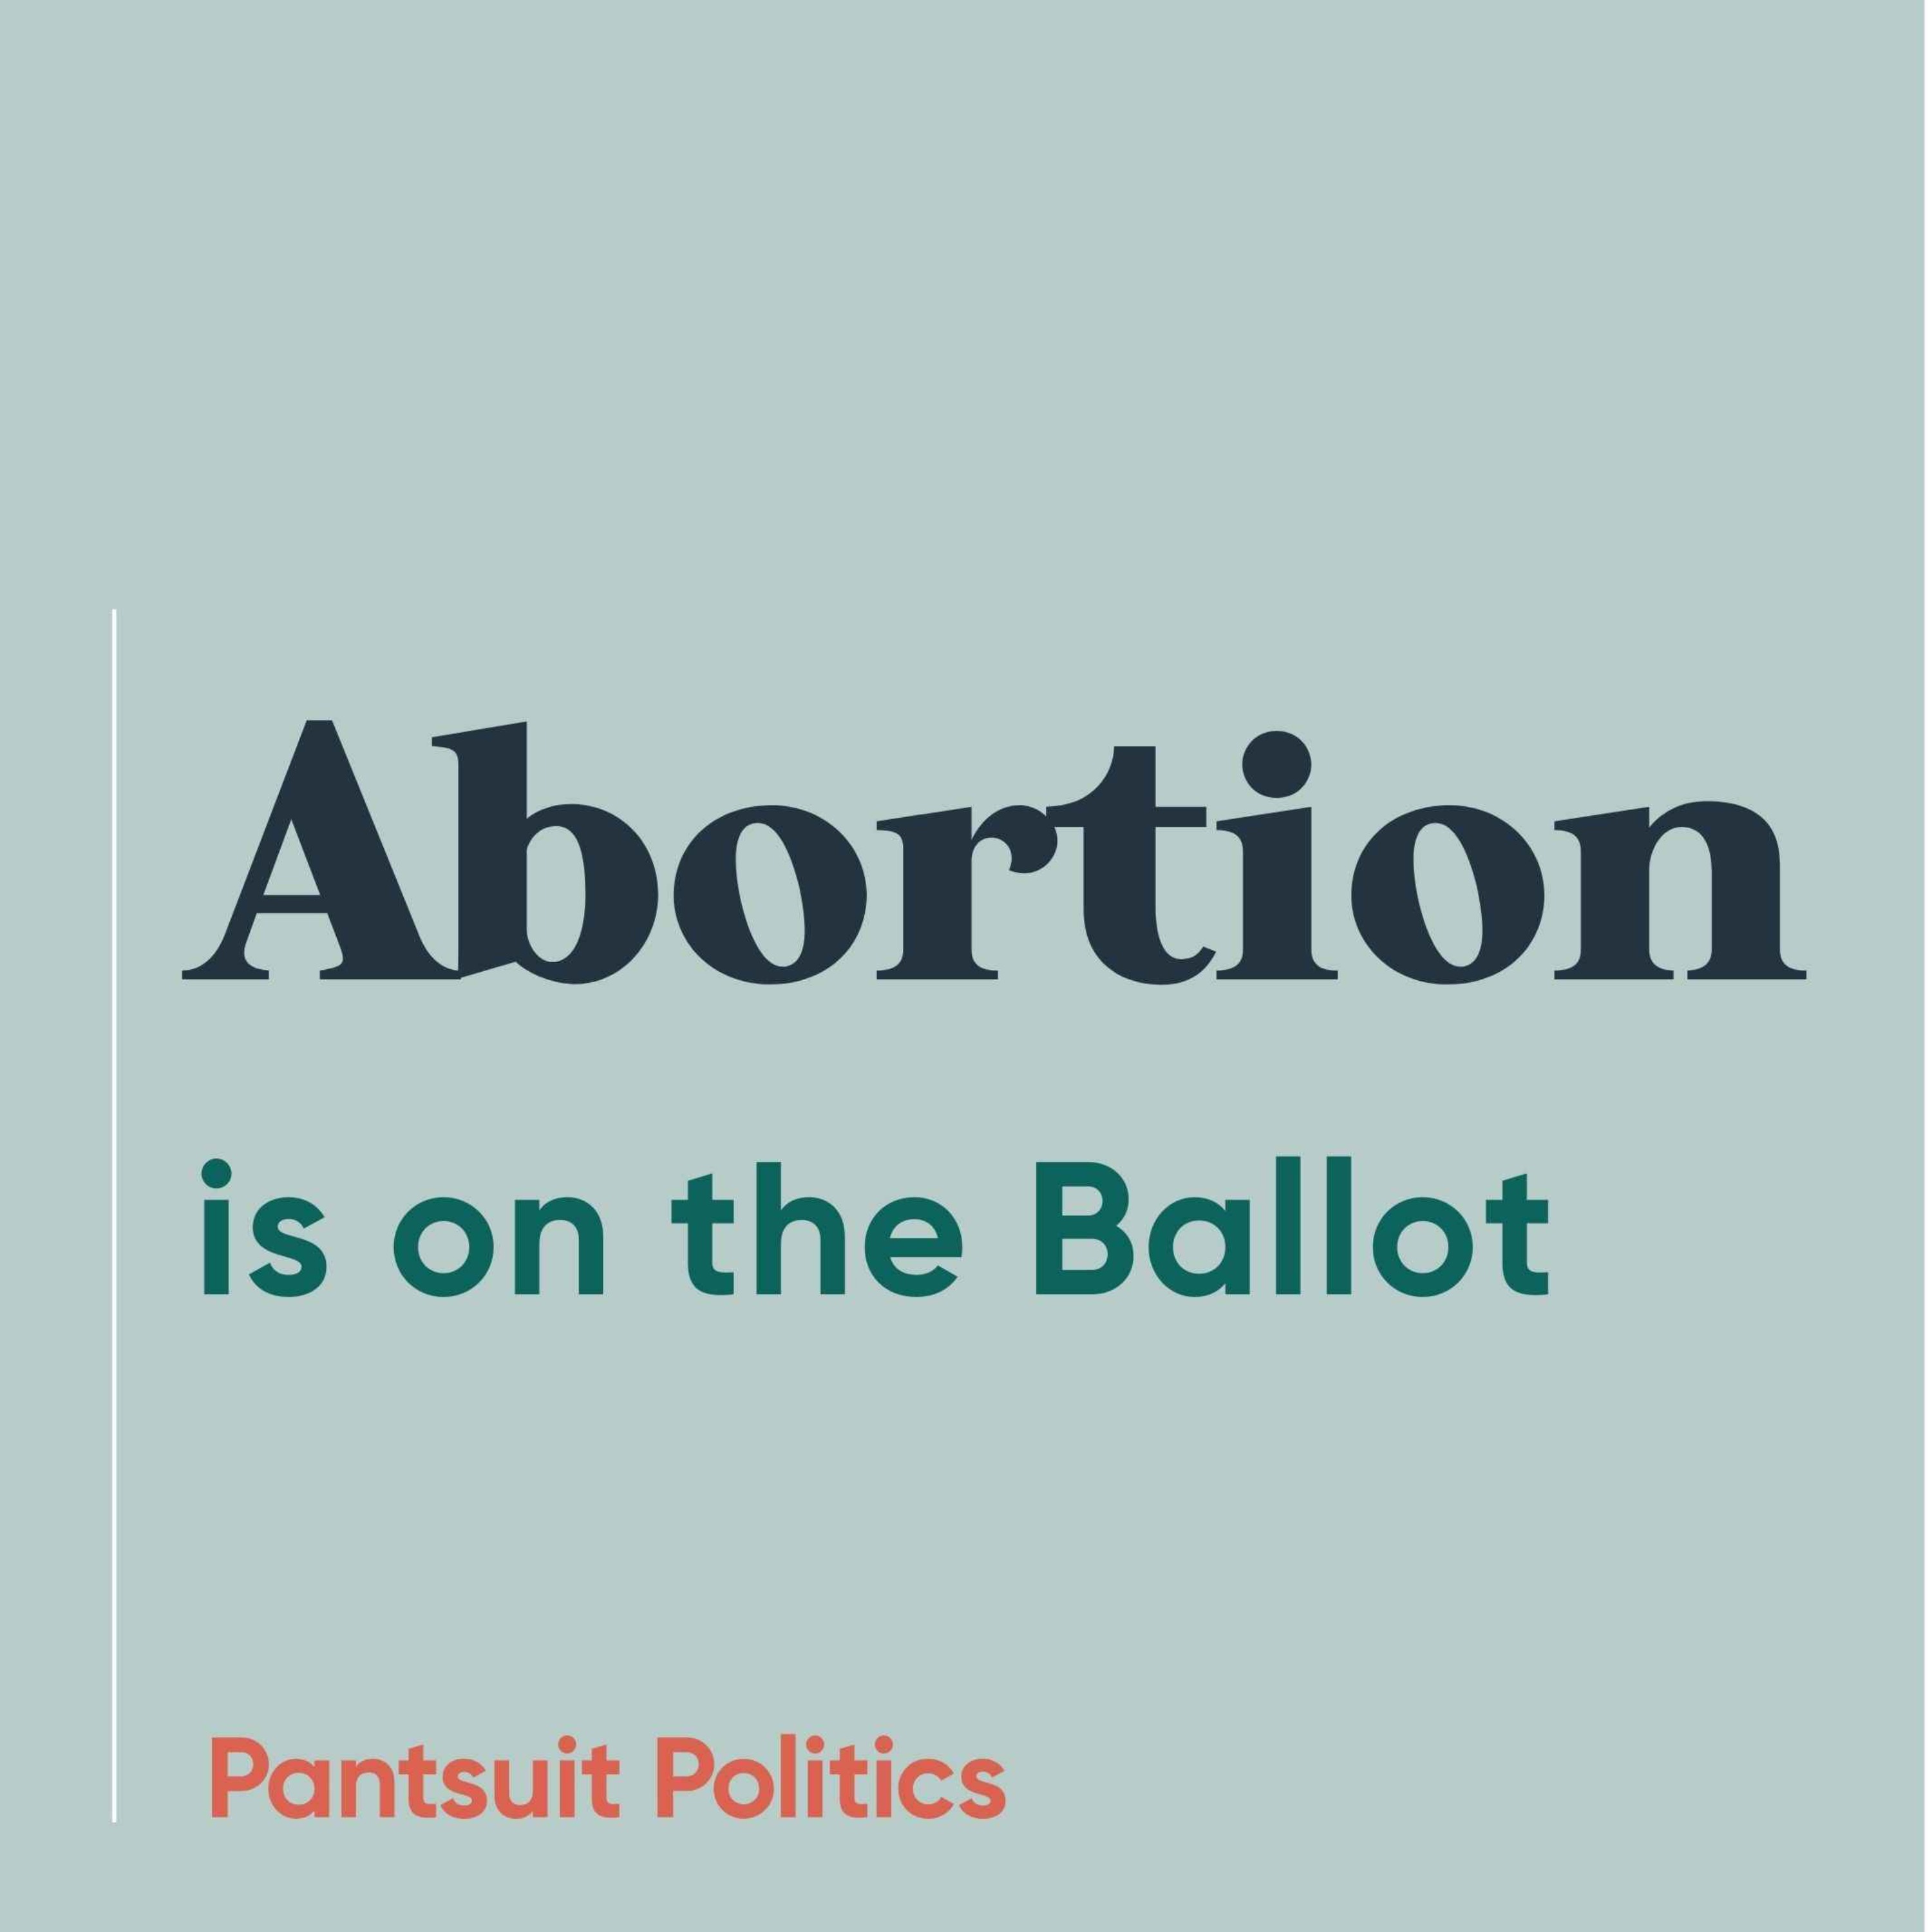 Abortion is on the Ballot